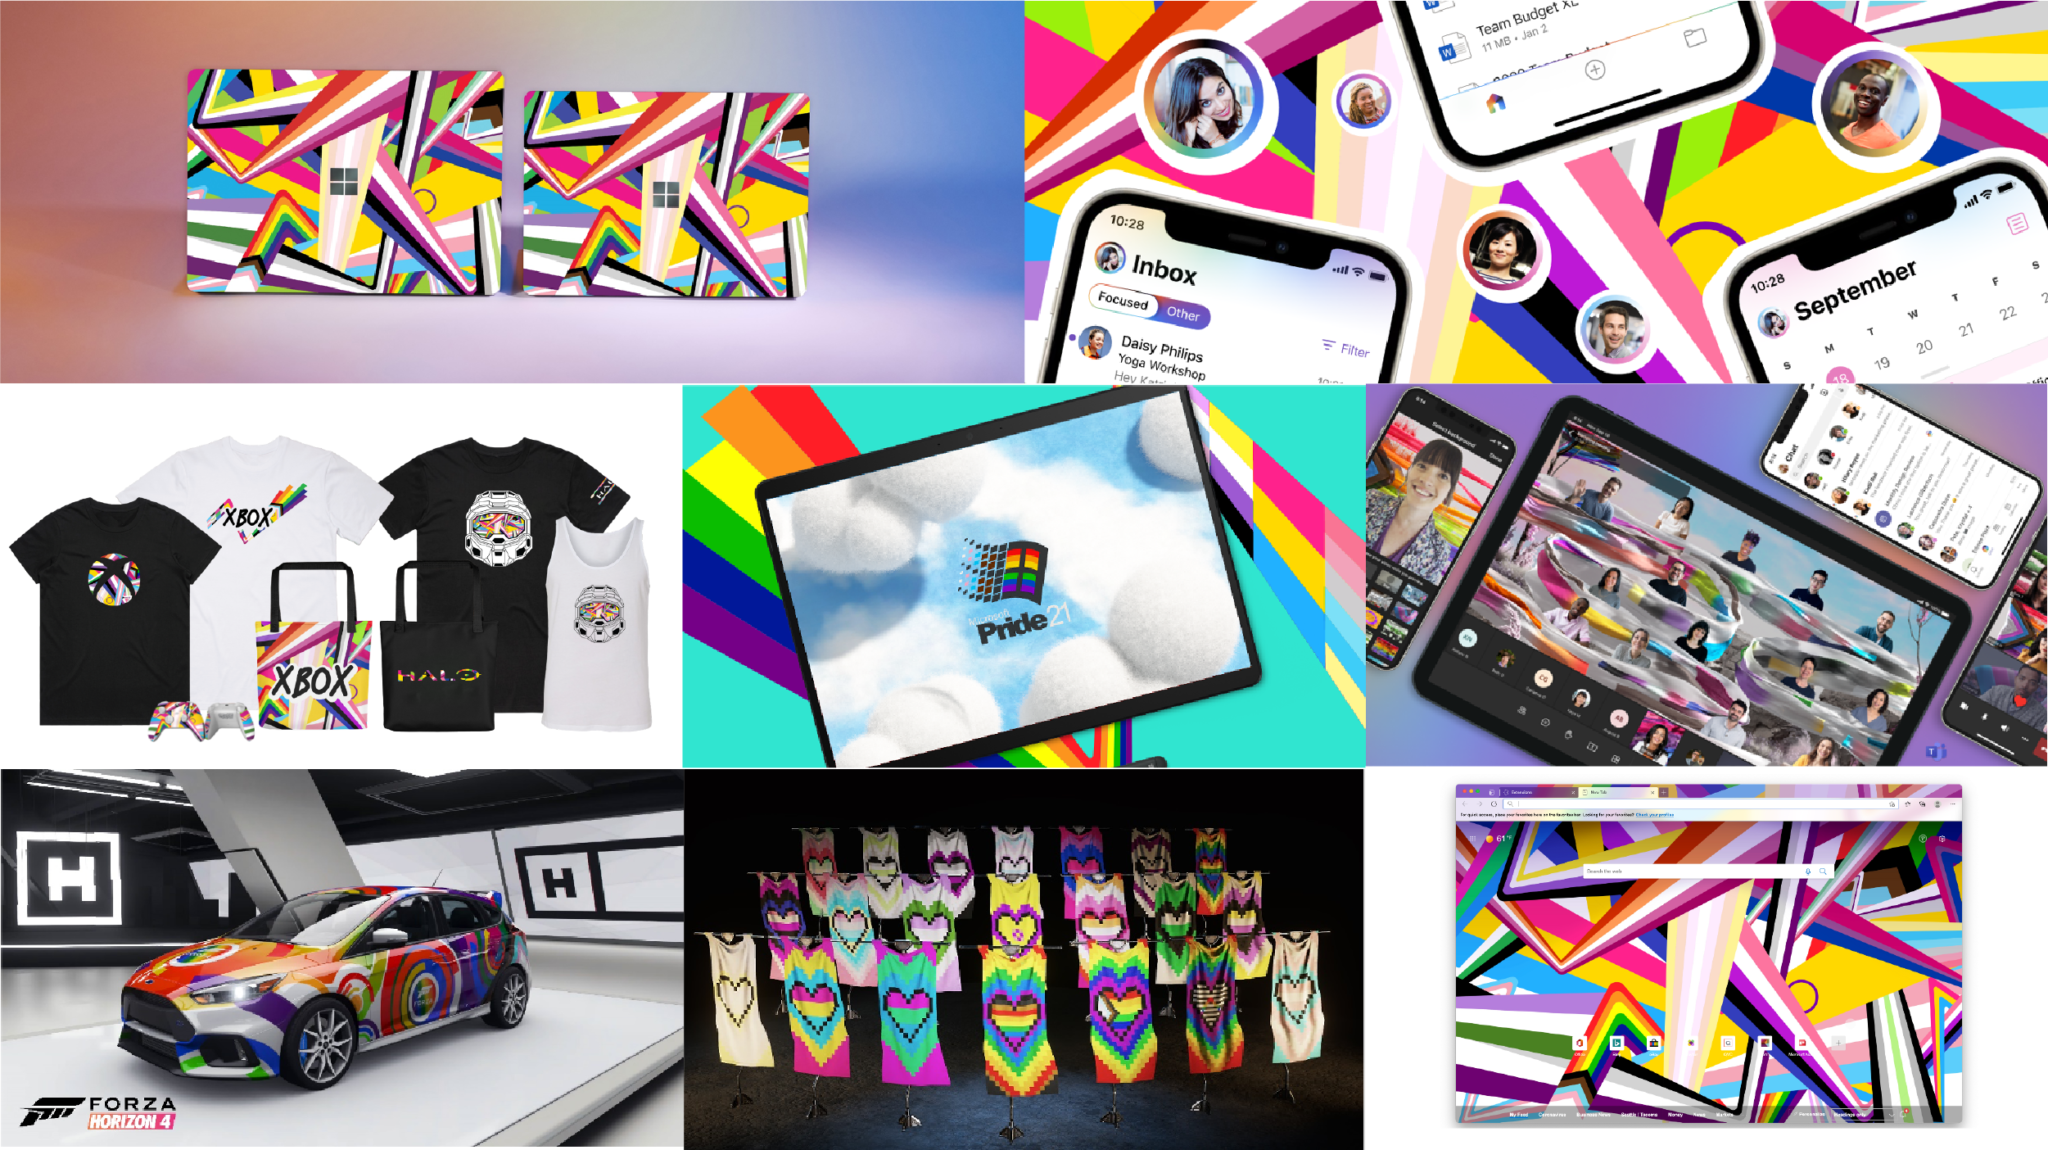 Microsoft celebrates Pride by centering on intersectionality, donating to LGBTQI+ non-profits and releasing the largest and most inclusive product lineup